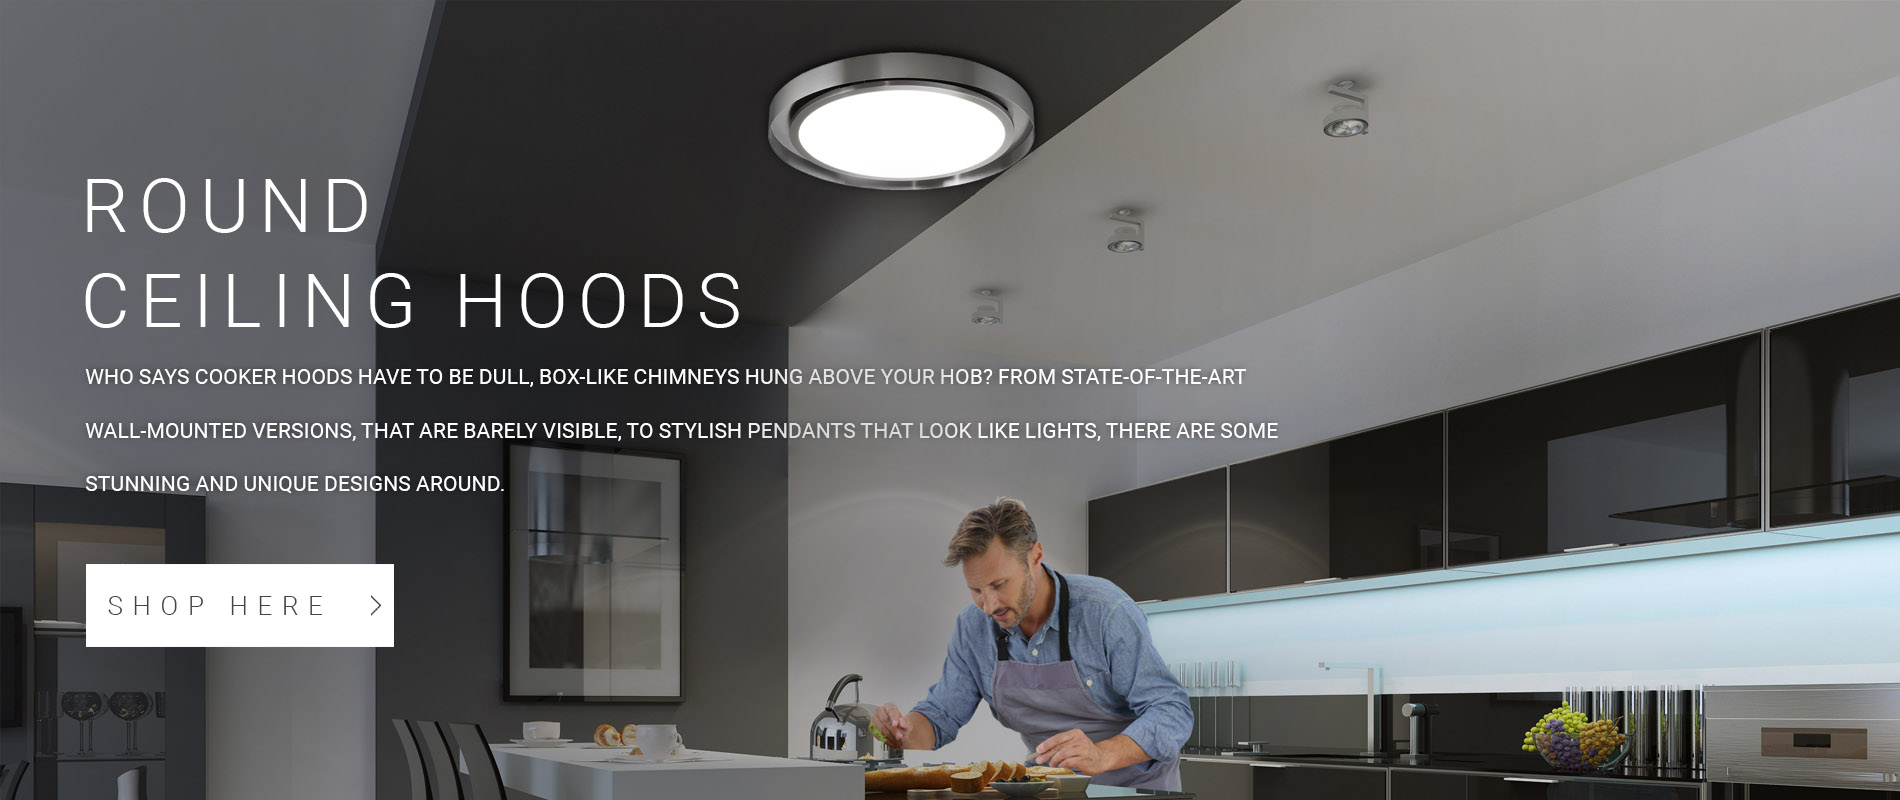 Round Ceiling Cooker Hoods